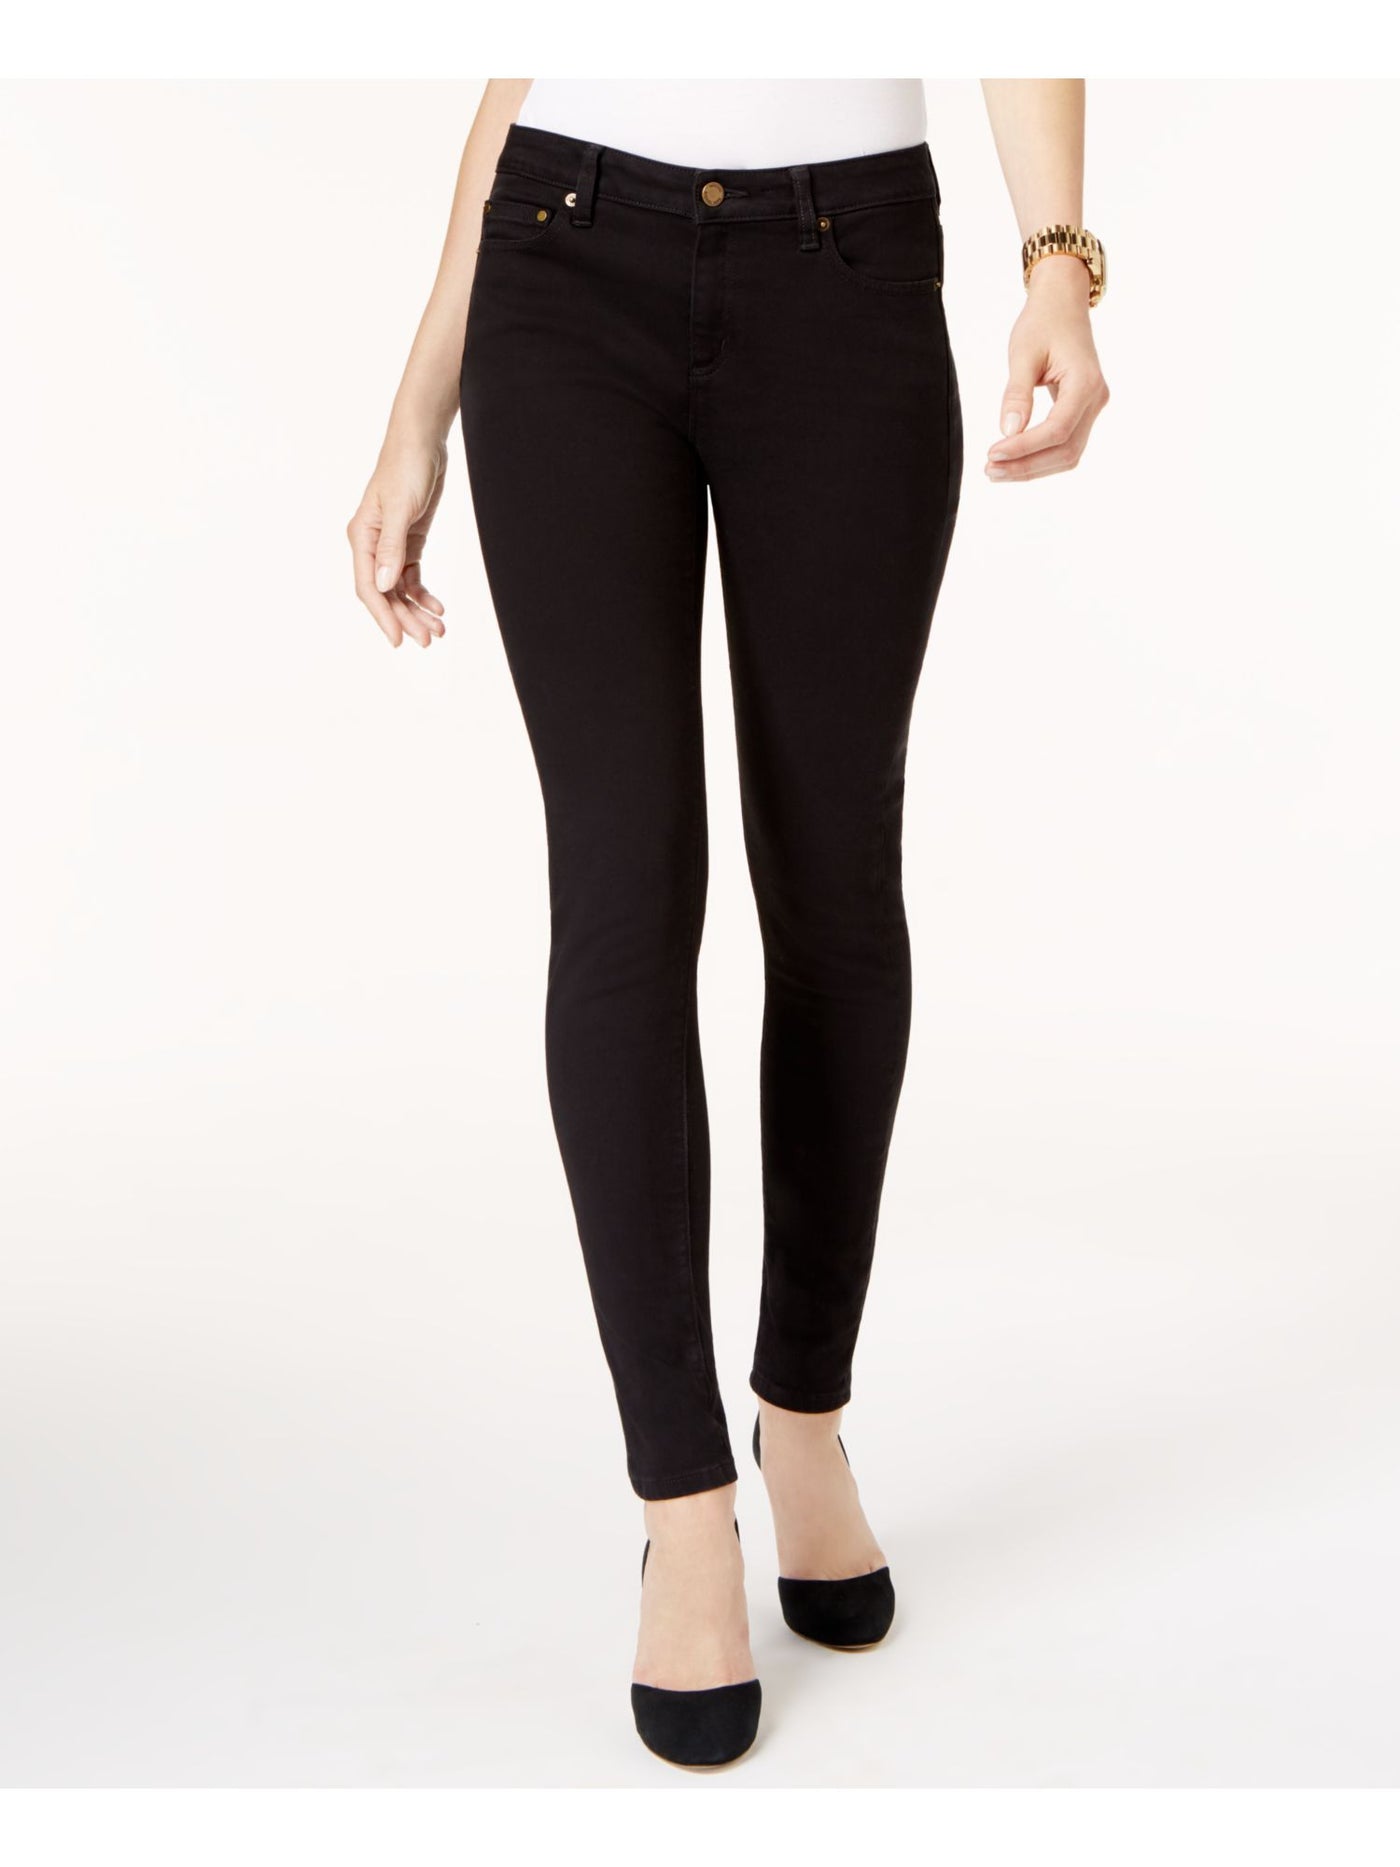 MICHAEL MICHAEL KORS Womens Black Stretch Zippered Pocketed Ankle Length Skinny Jeans 0